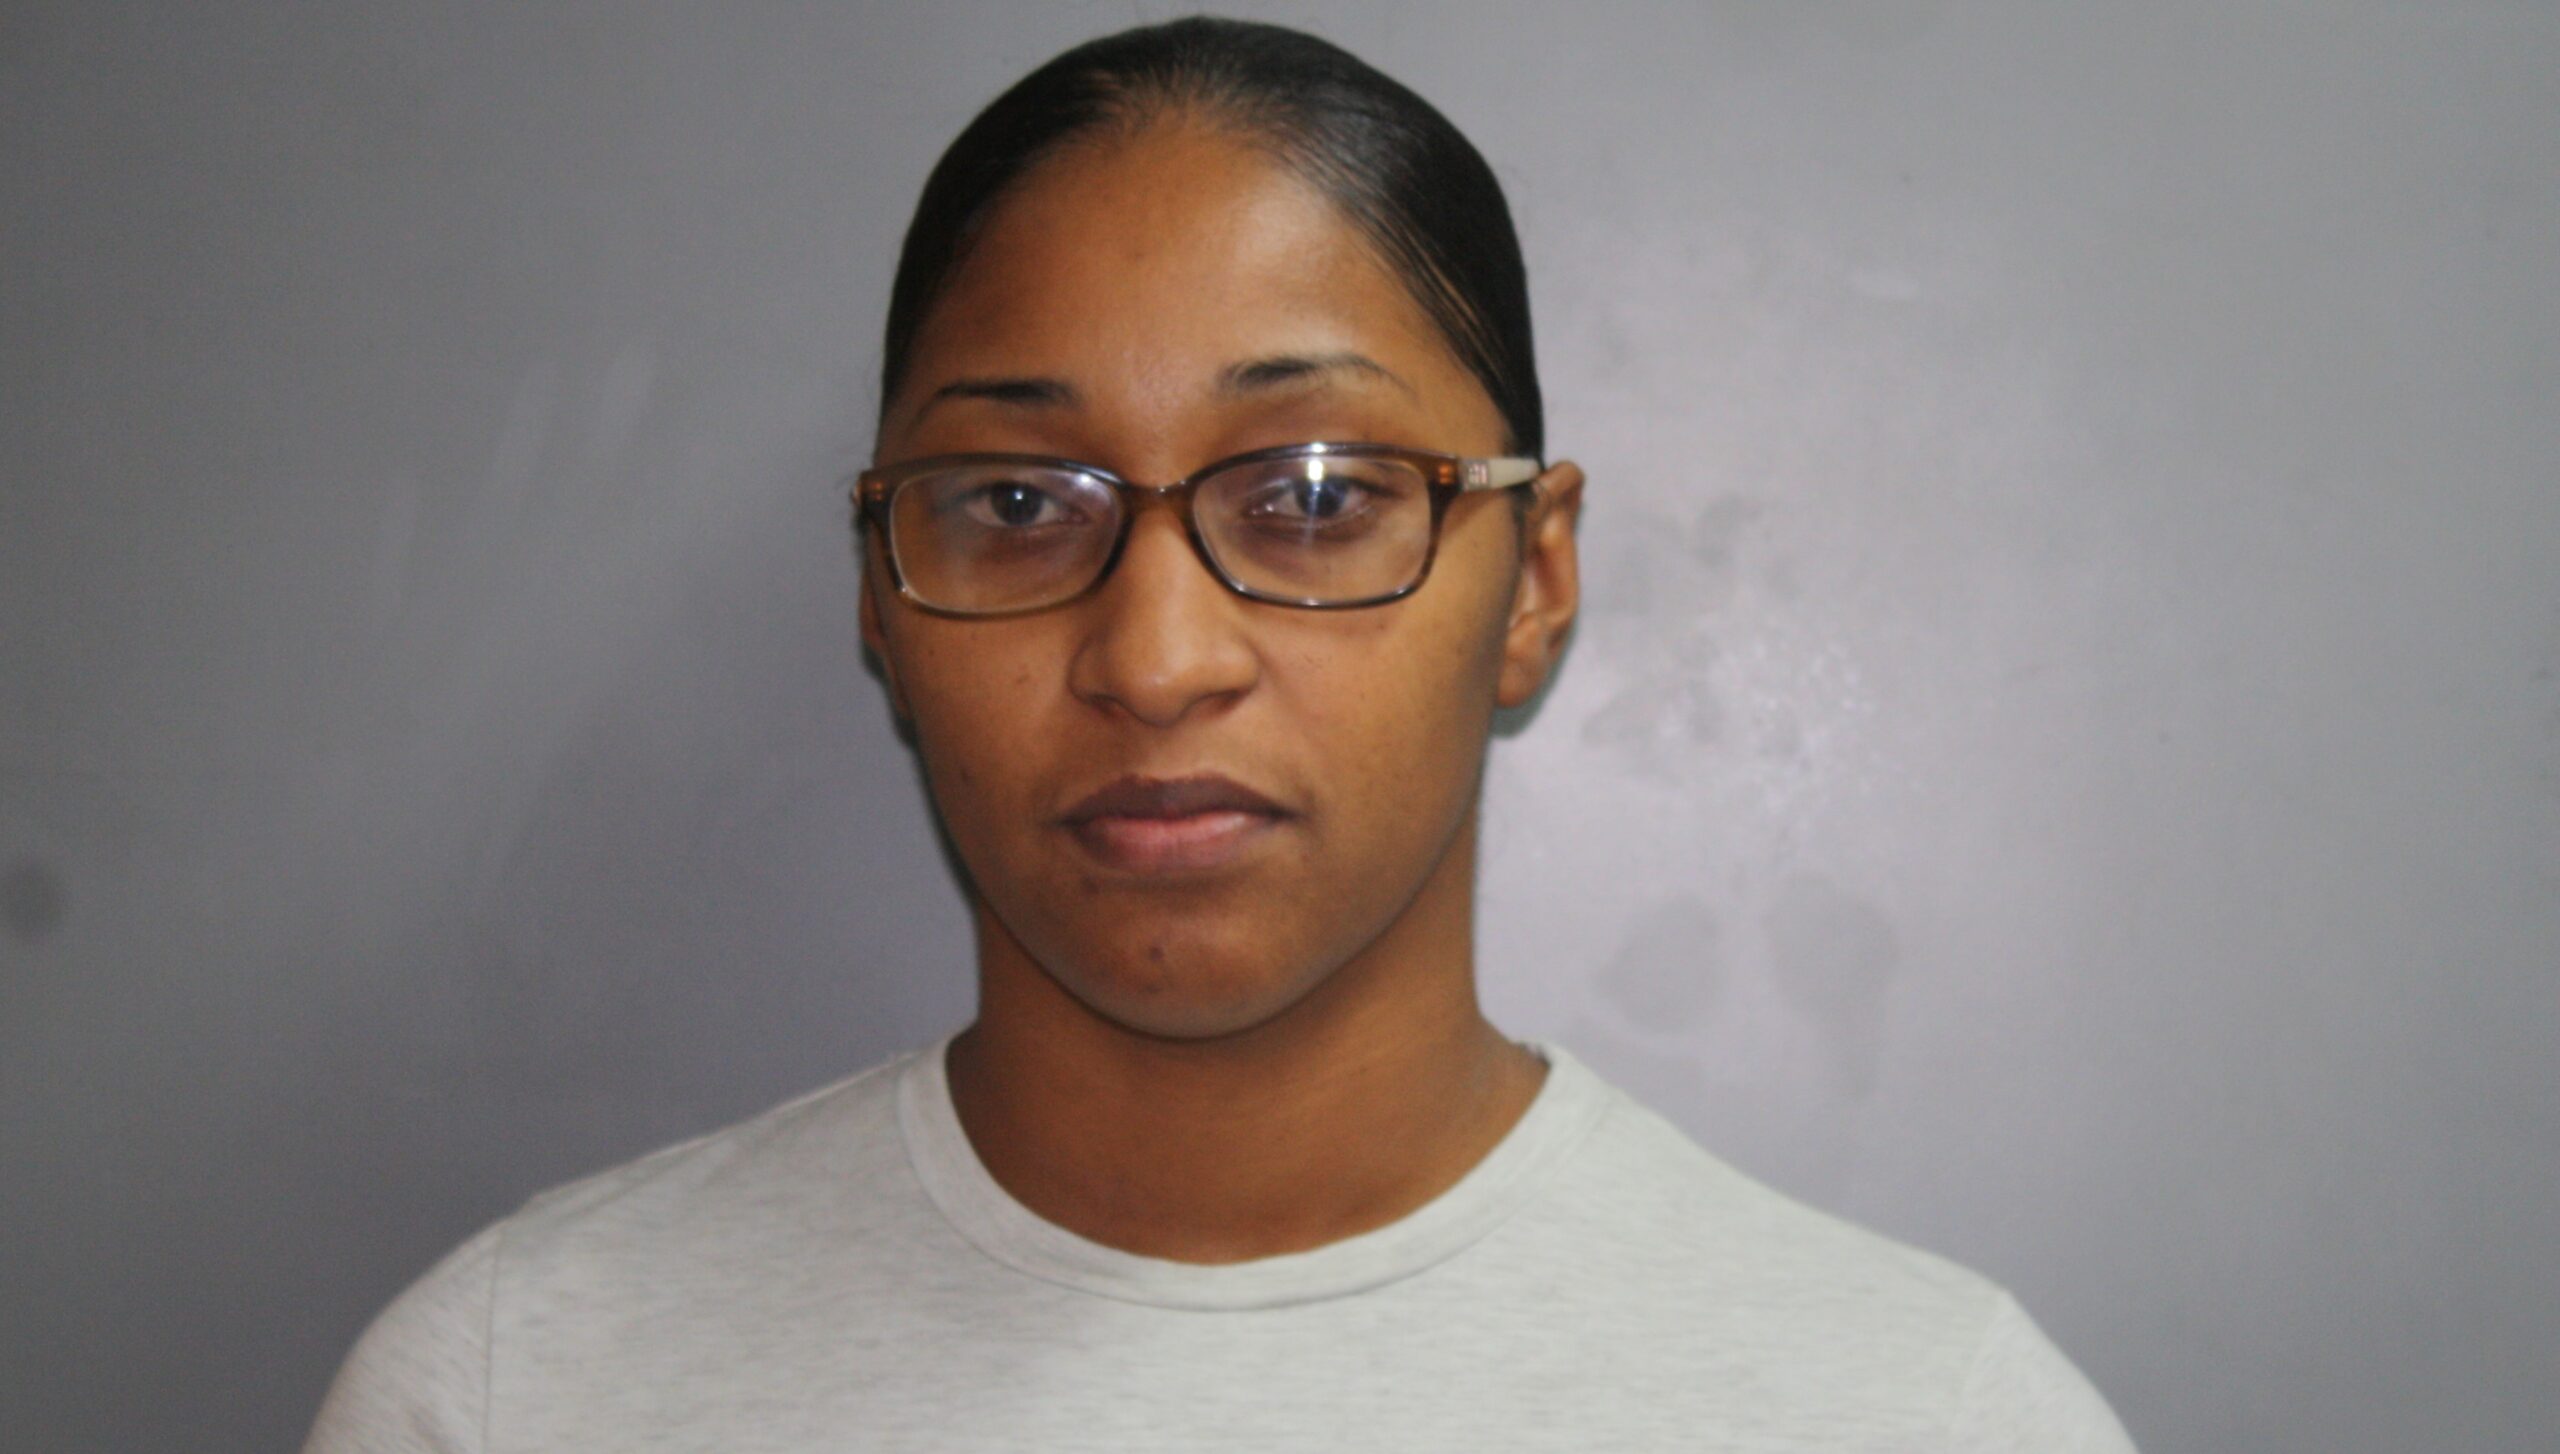 VIPD: St. Croix Woman Forged Check For $4,000 In Her Mother's Name